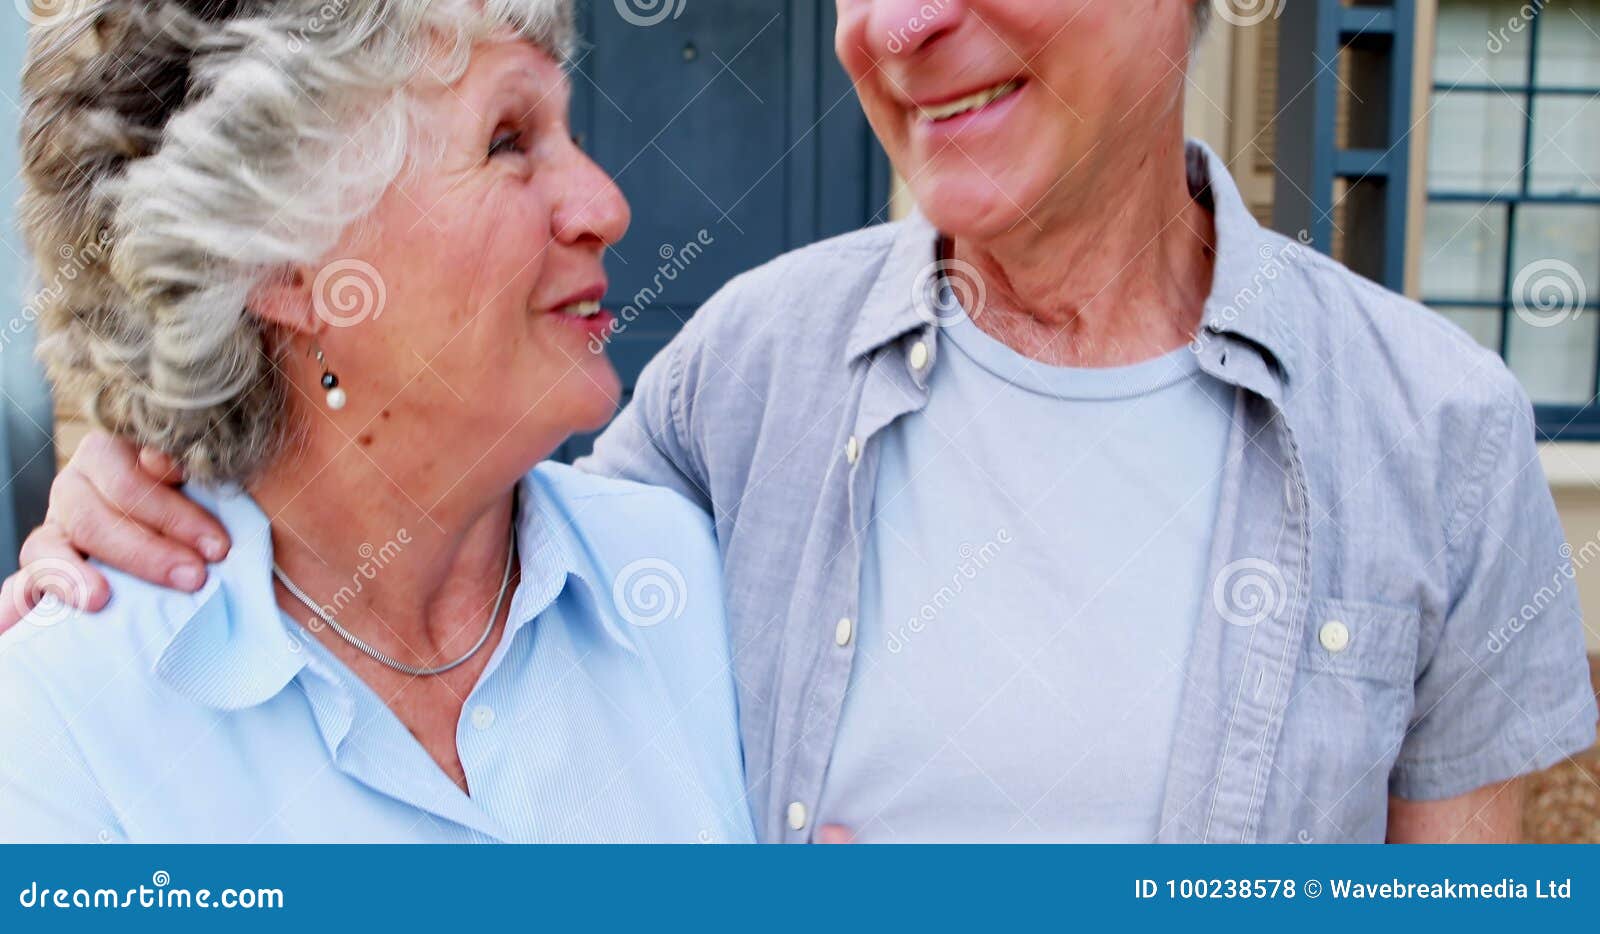 Romantic Senior Couple Kissing Each Other 4k Stock Footage Video Of Lifestyle Elderly 100238578 